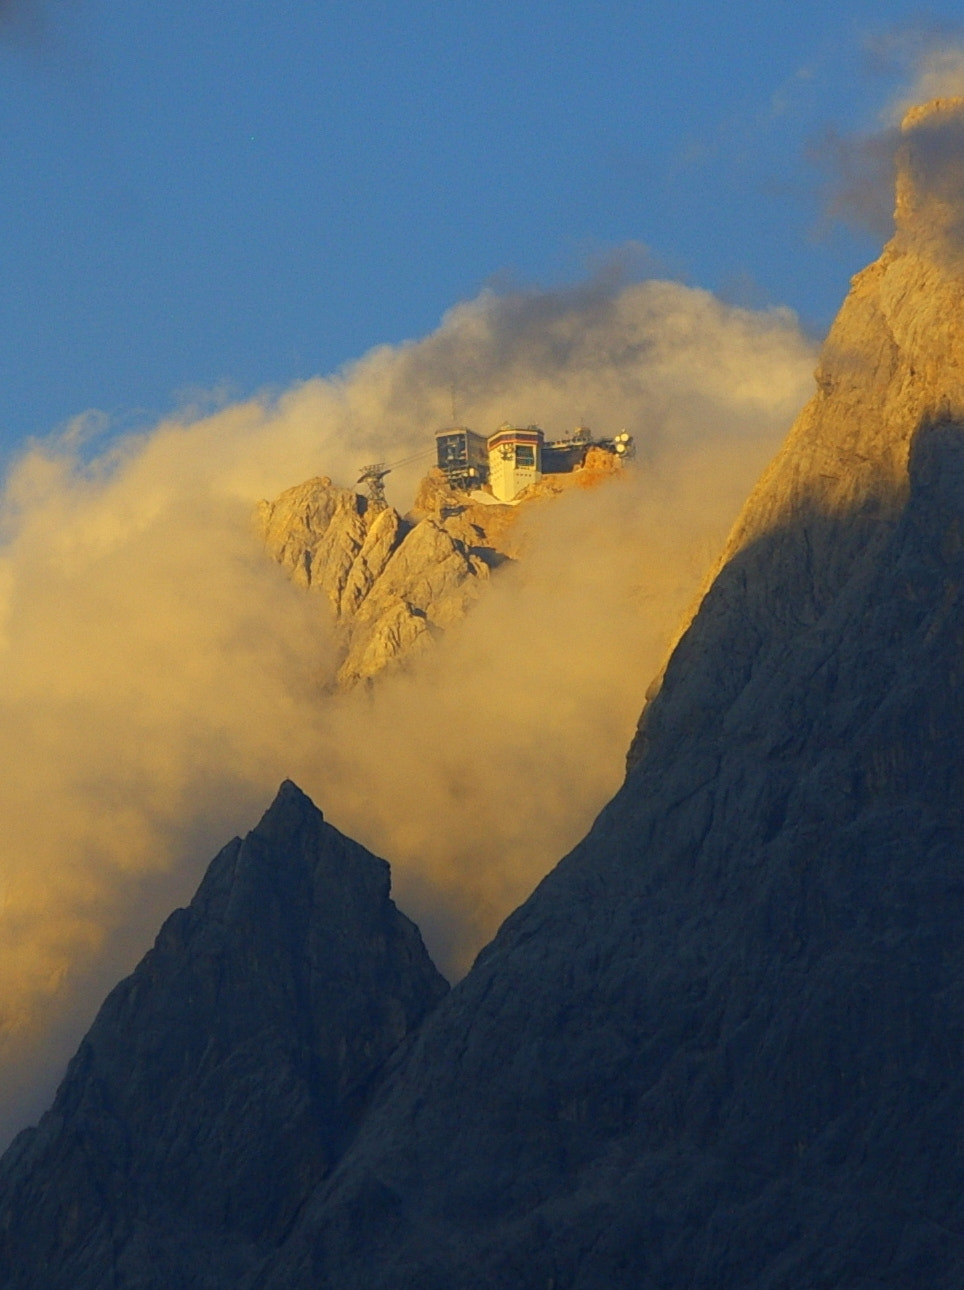 Pentax smc DA 50-200mm F4-5.6 ED sample photo. At the top, enveloped by clouds - zugspitze photography